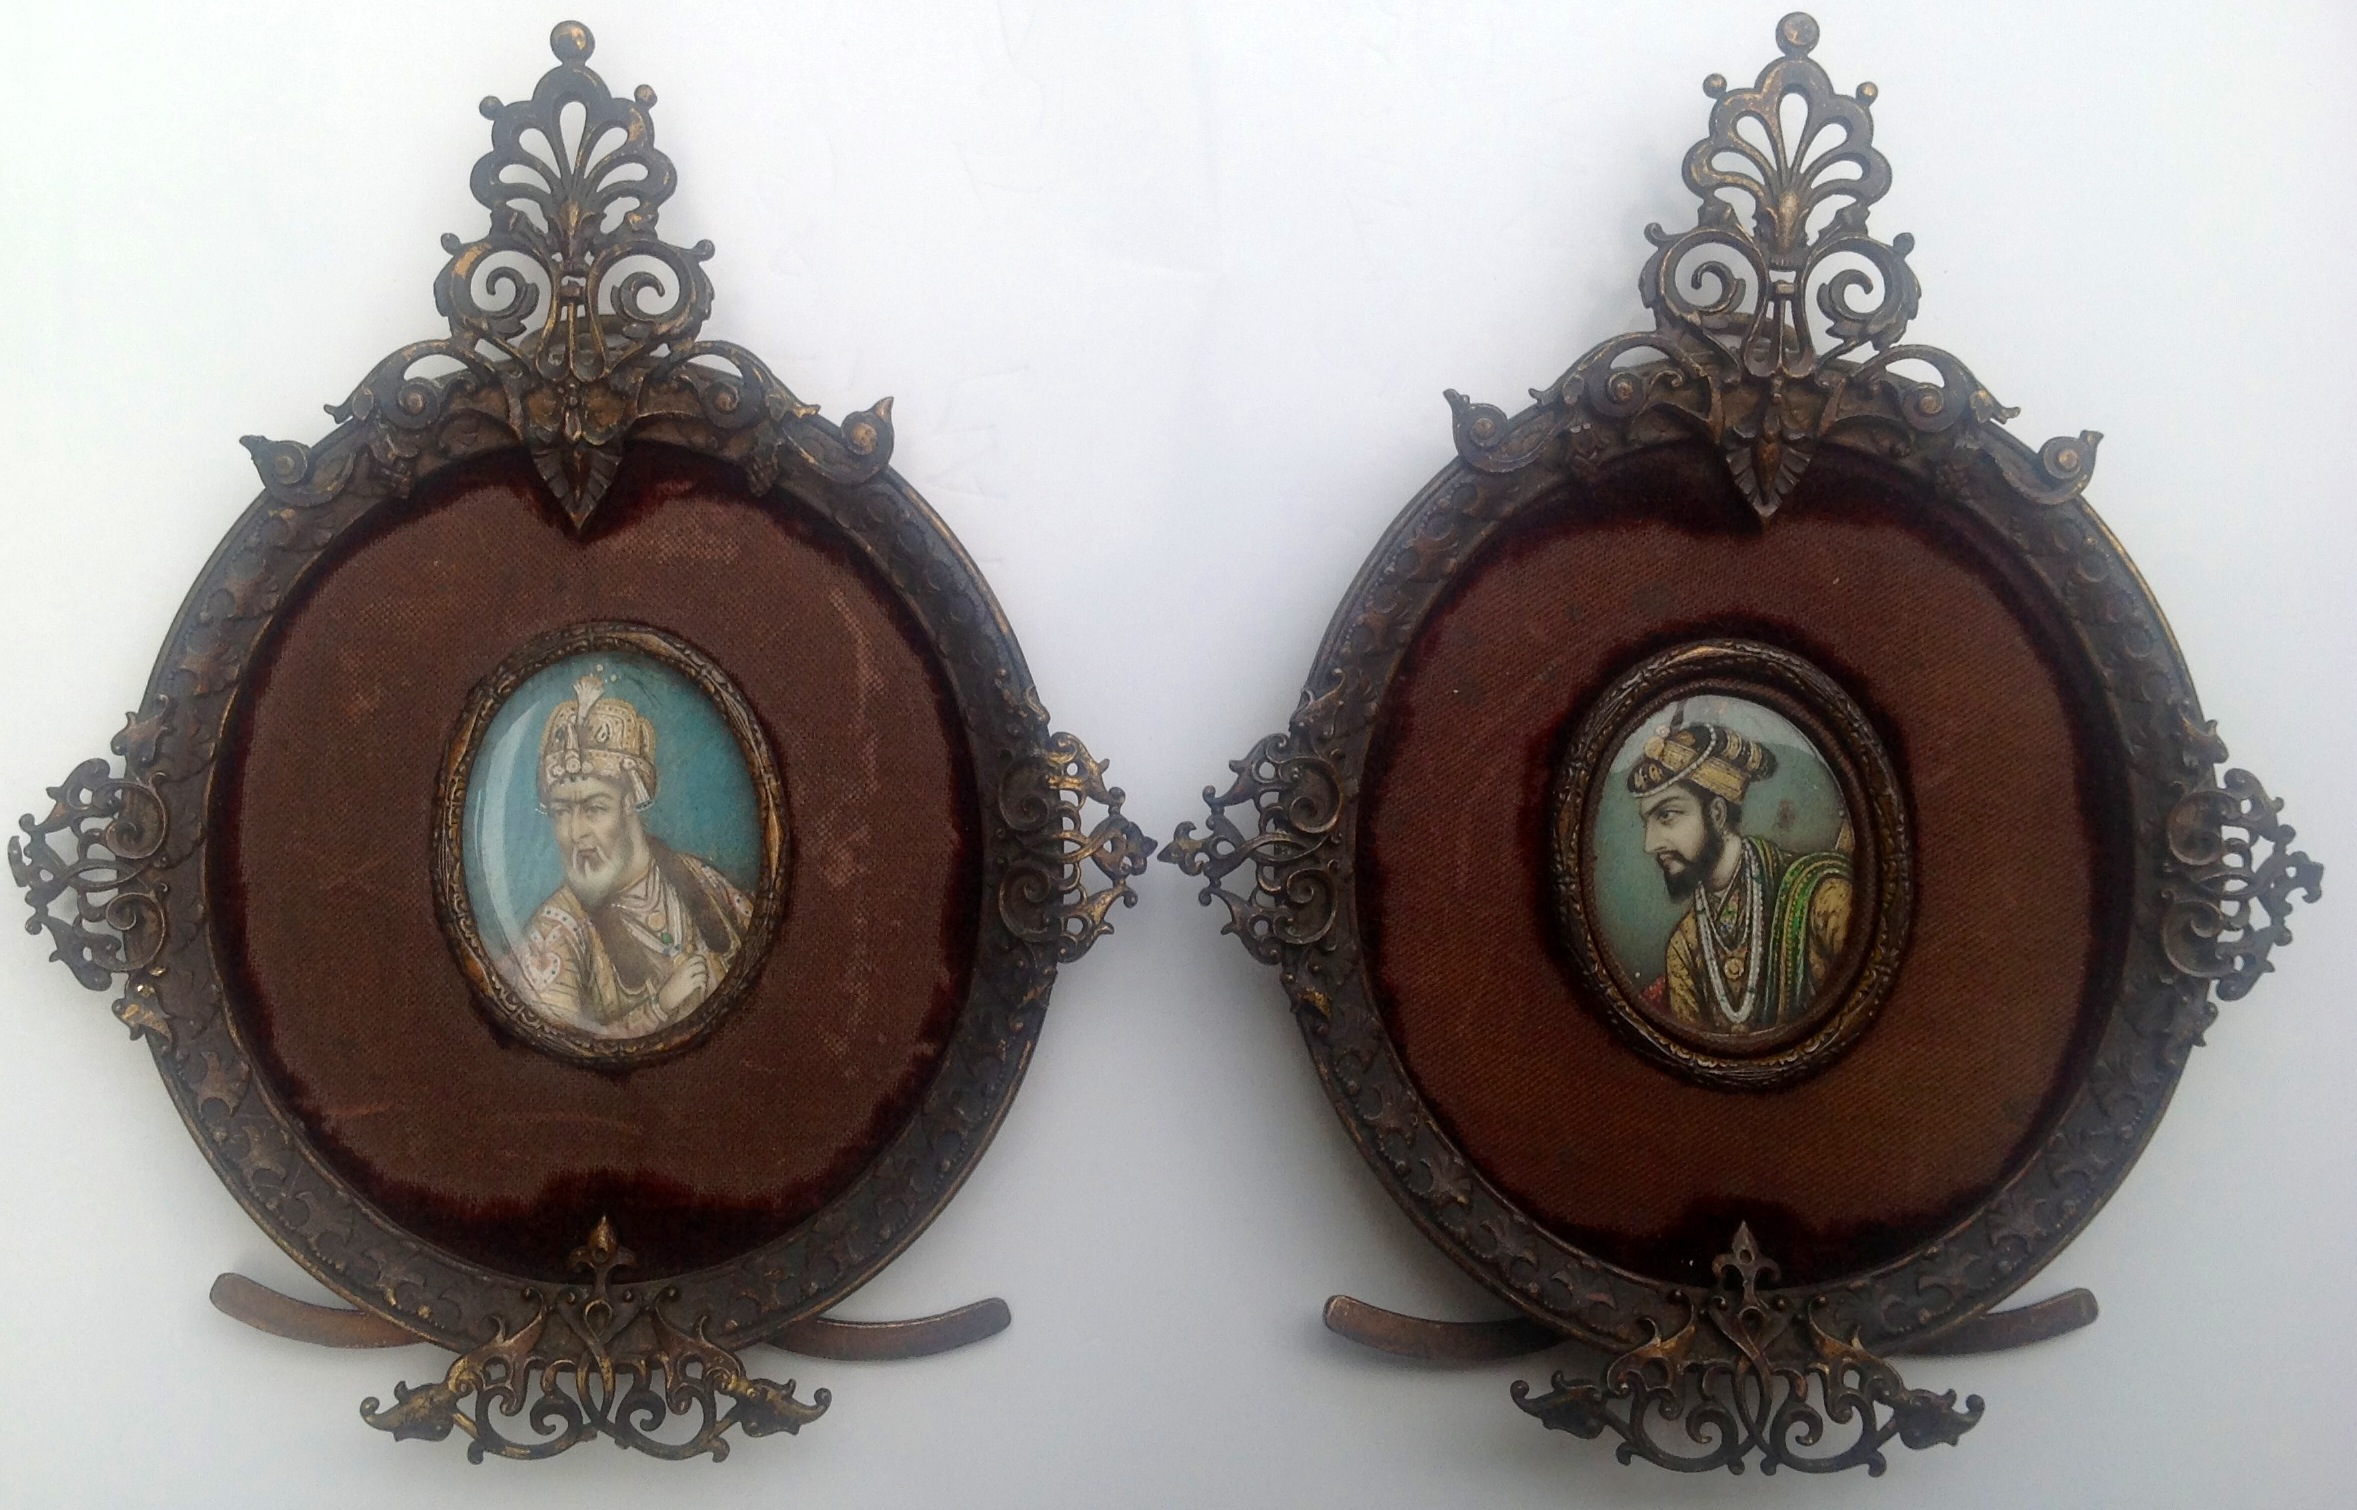 A PAIR OF 19TH CENTURY OVAL MINIATURE PORTRAITS ON IVORY Indian Maharaja's in jeweled turbans, set